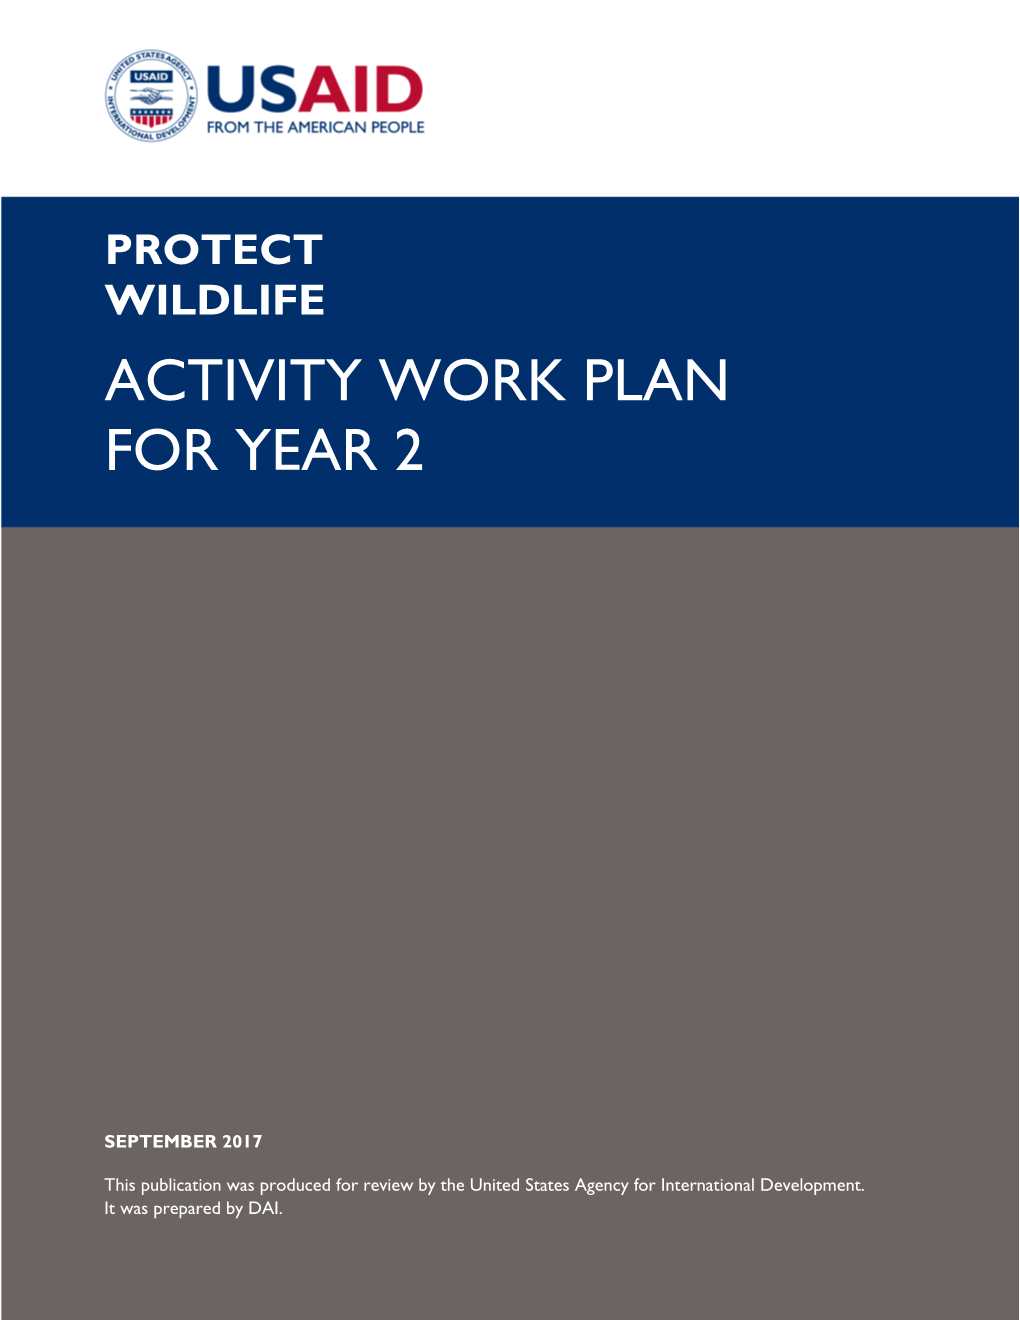 Protect Wildlife Activity Work Plan for Year 2